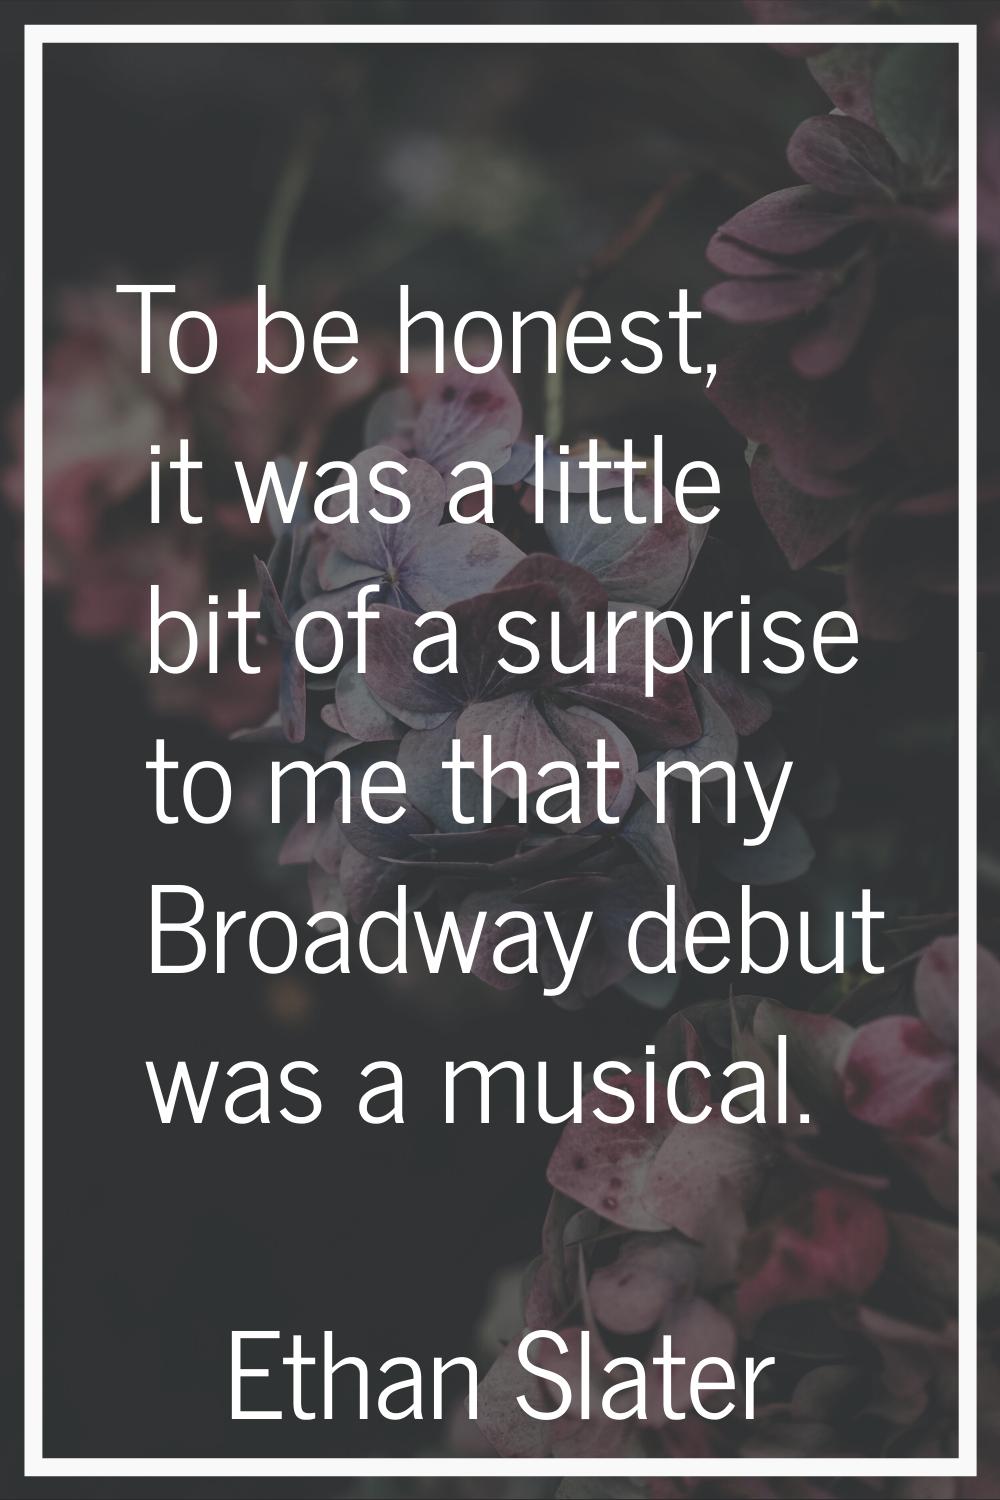 To be honest, it was a little bit of a surprise to me that my Broadway debut was a musical.